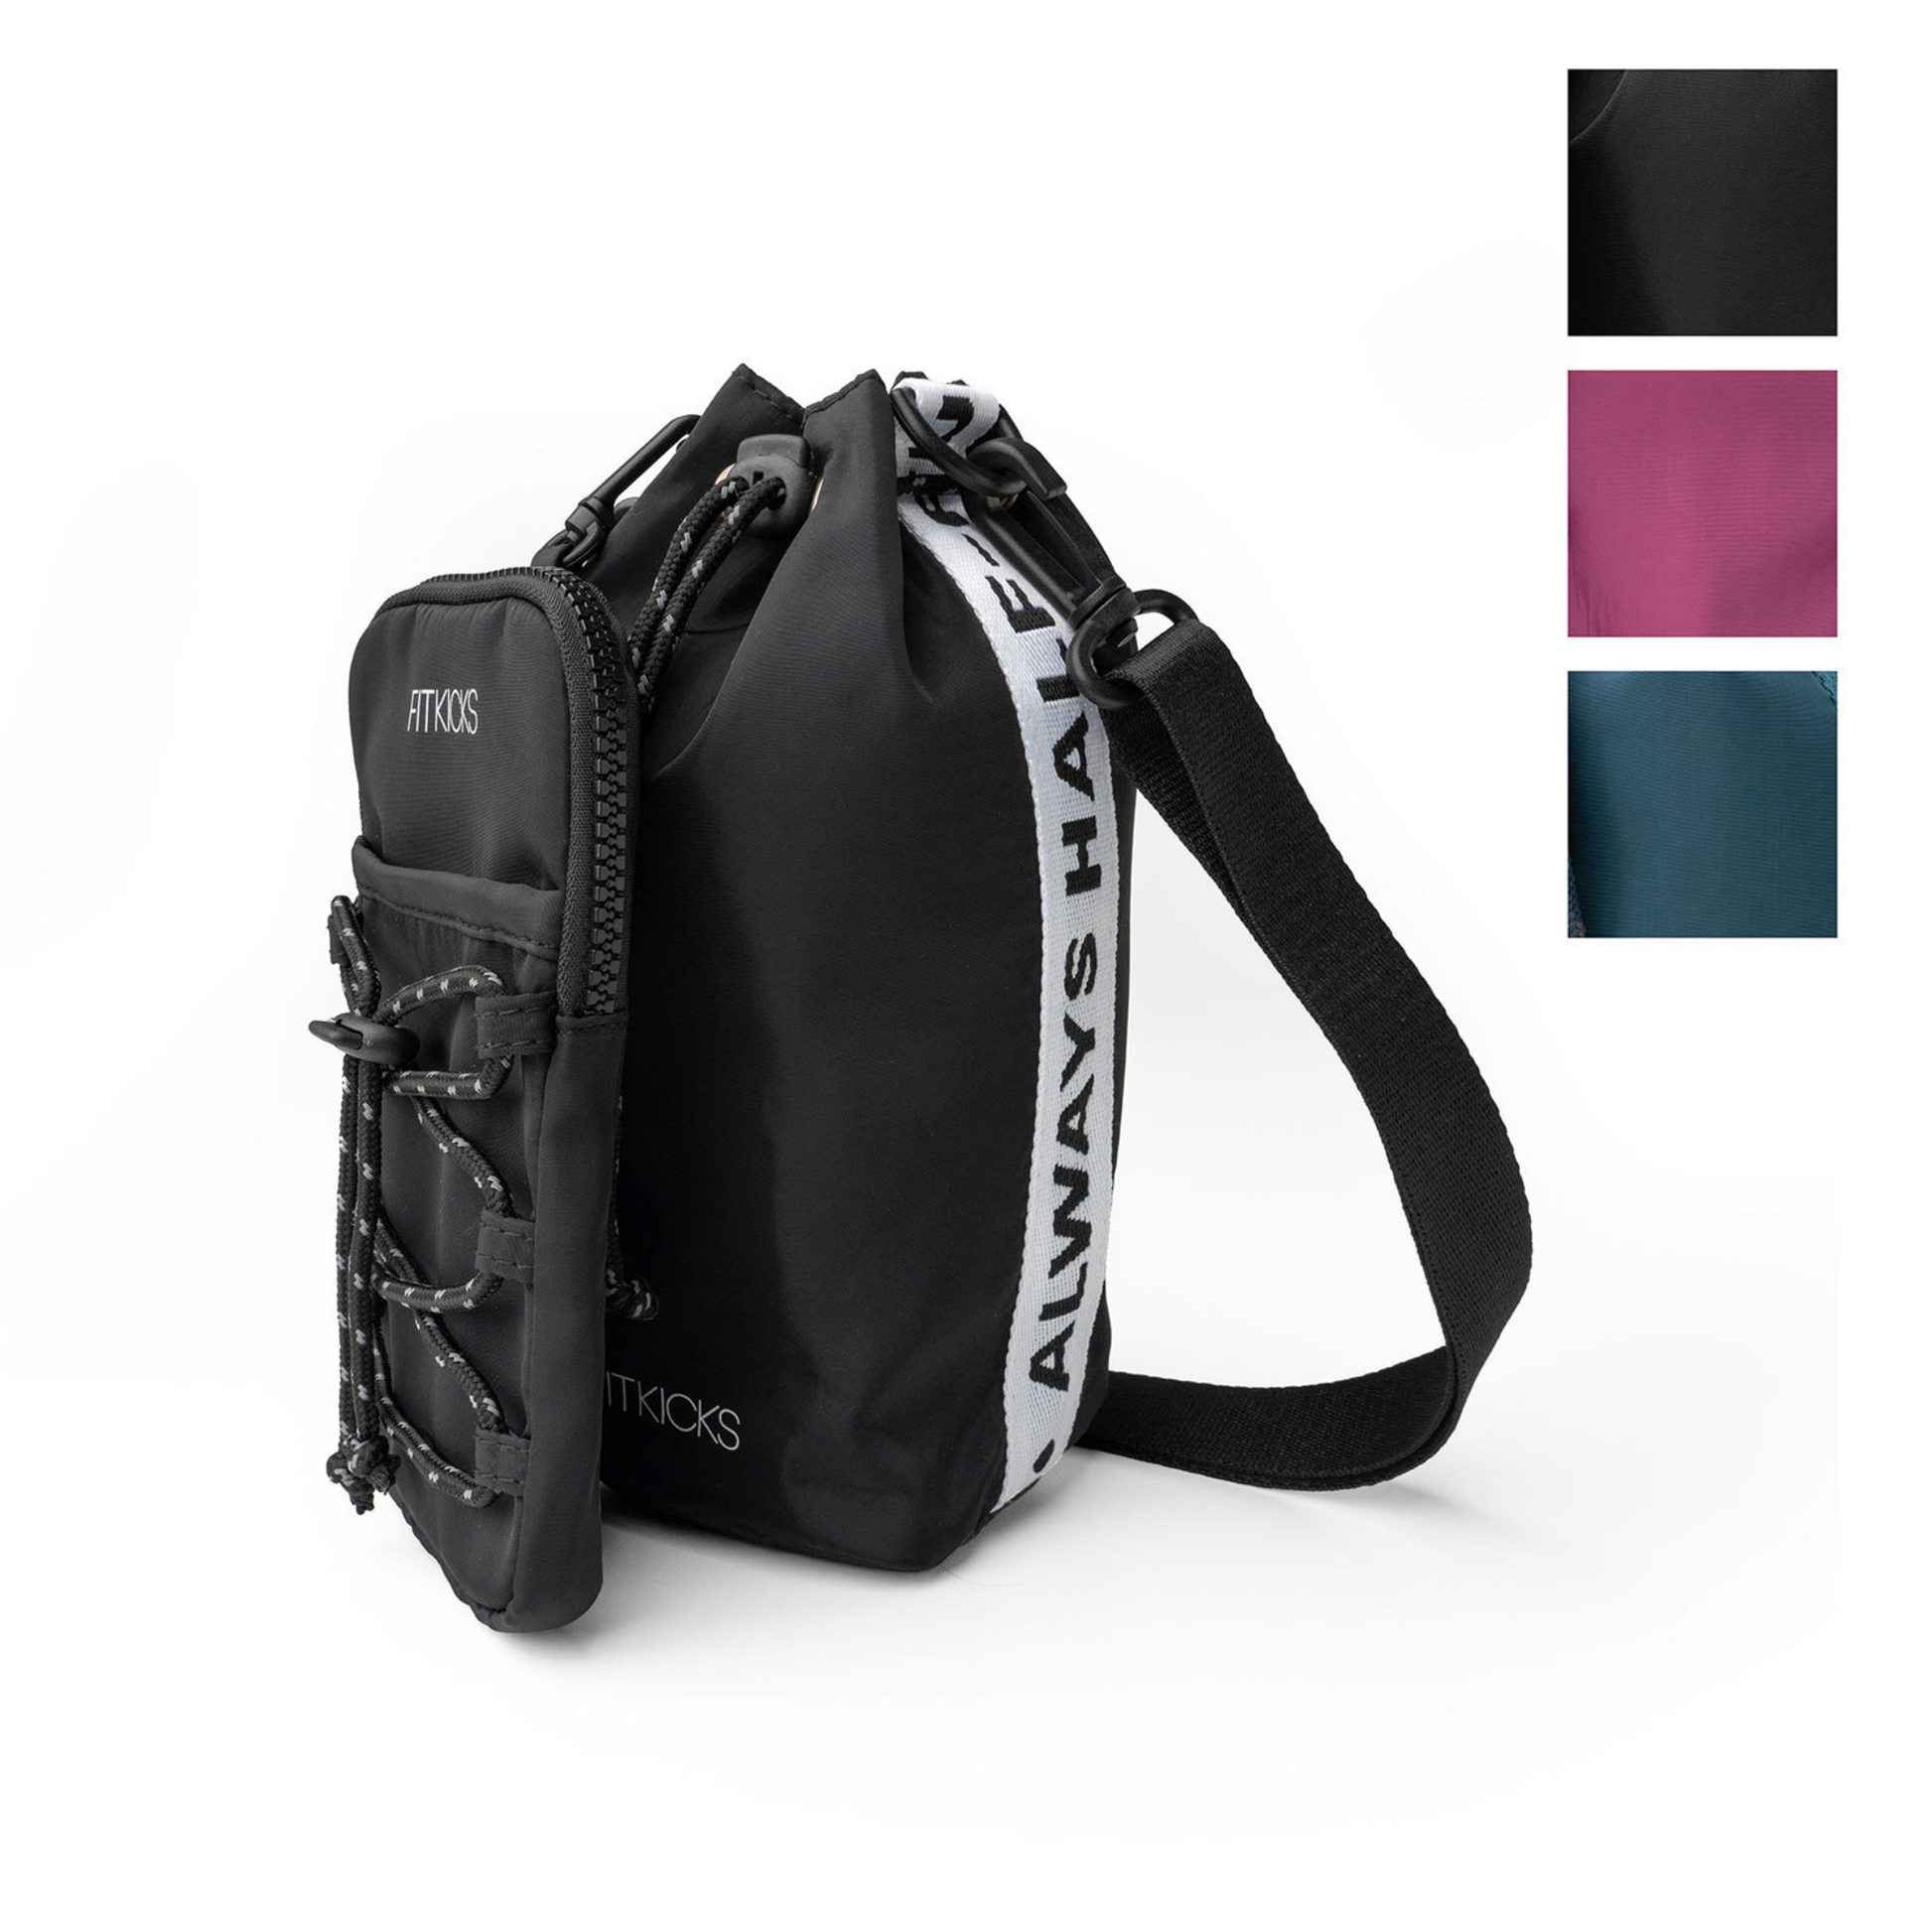 Optimist H20 Crossbody and Phone Pouch. Available in black, purple, and teal.